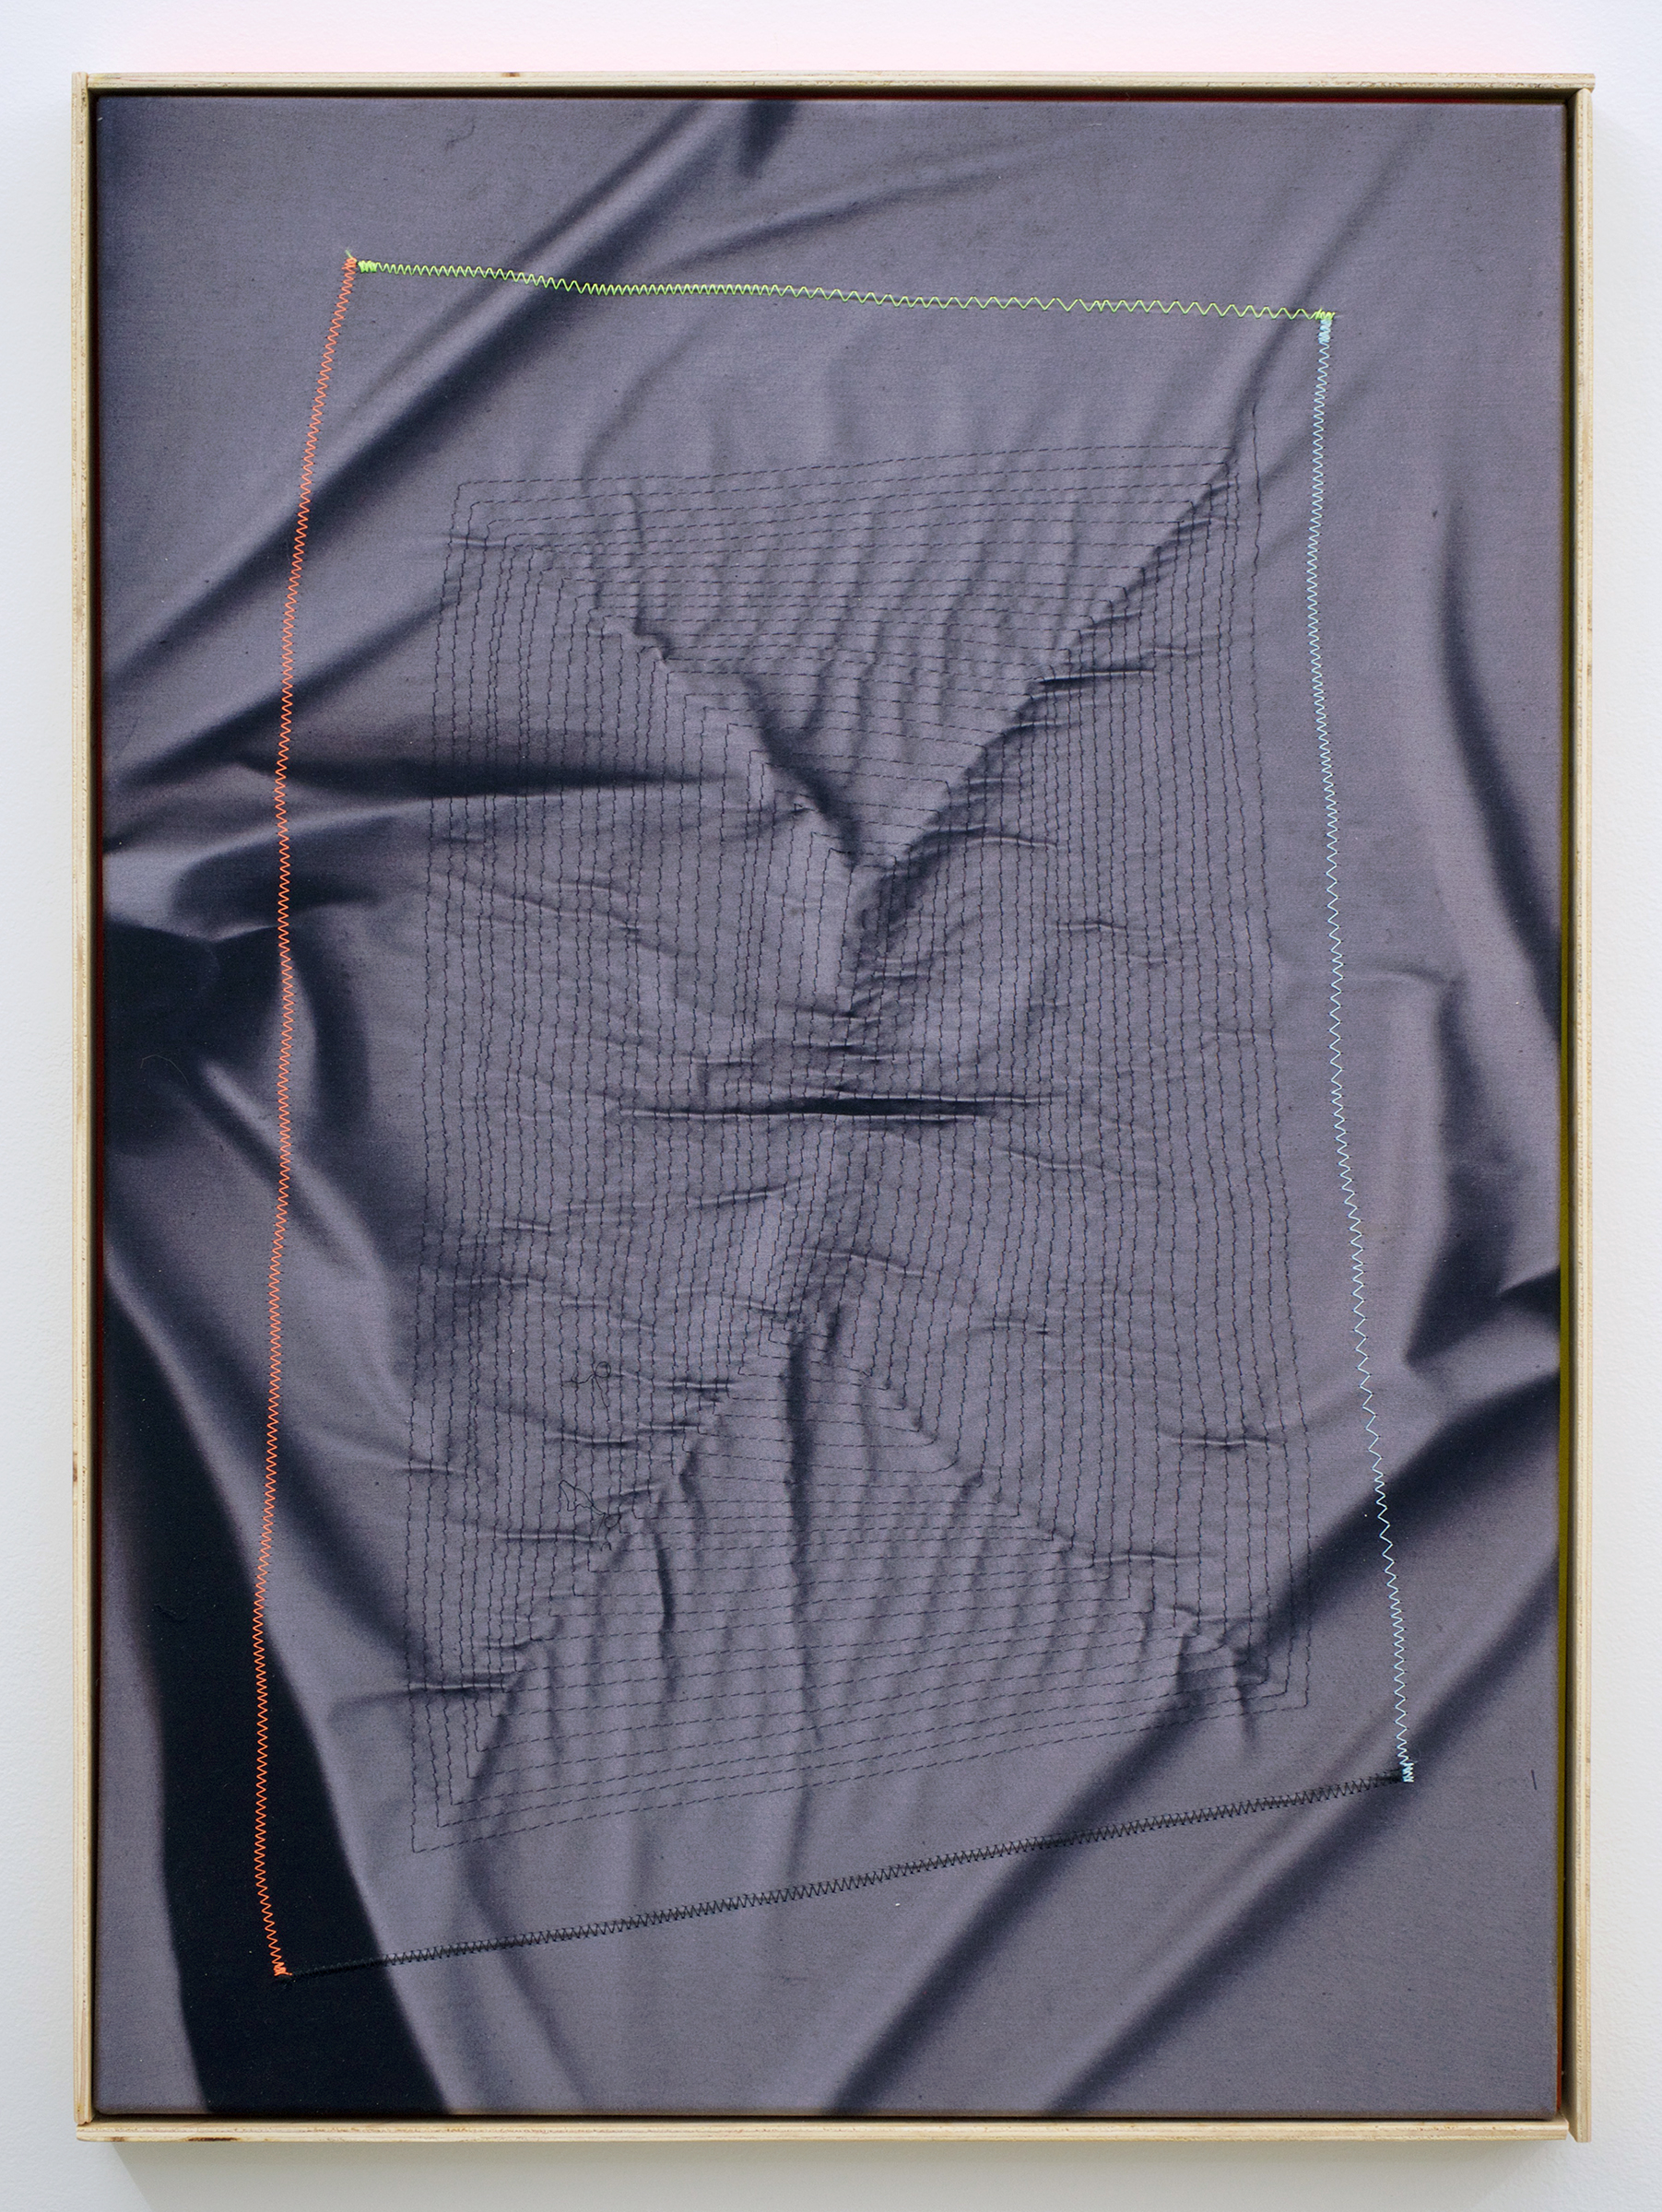   CHRIS DUNCAN   Ghost Pattern #2 (Summer/Winter 2016) six-month exposure/Oakland , 2017, sun, time and thread on fabric, 28" x 24" 